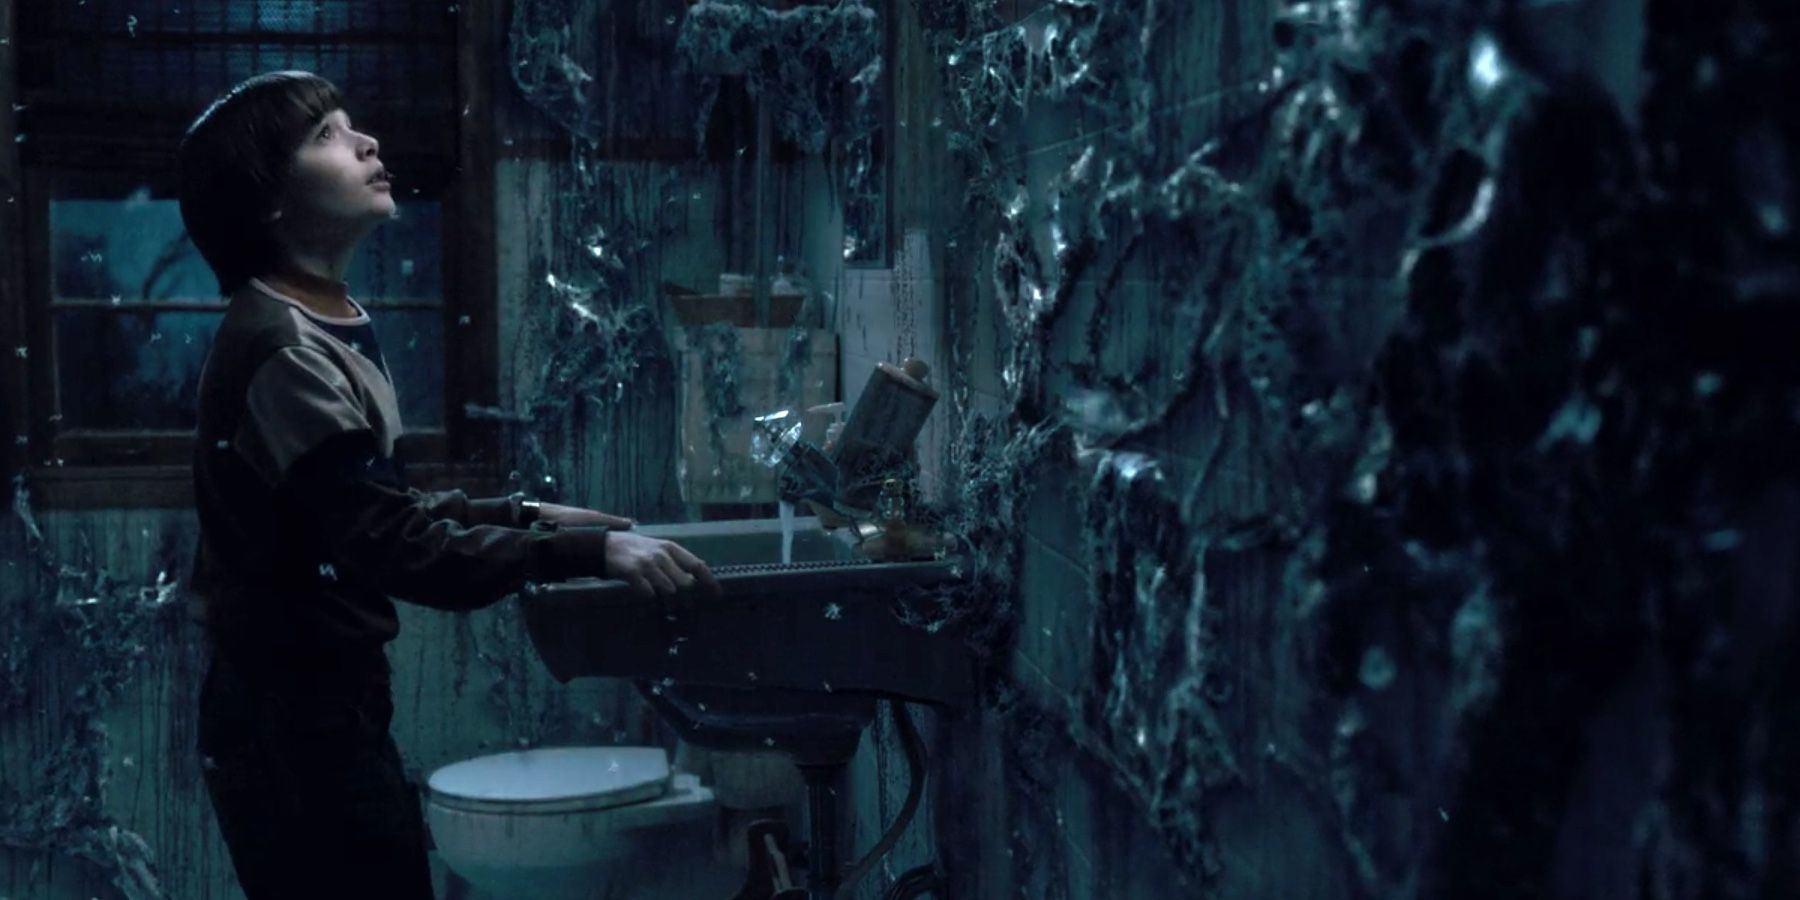 Will-looking-at-a-rotting-bathroom-in-Stranger-Things-Cropped-2